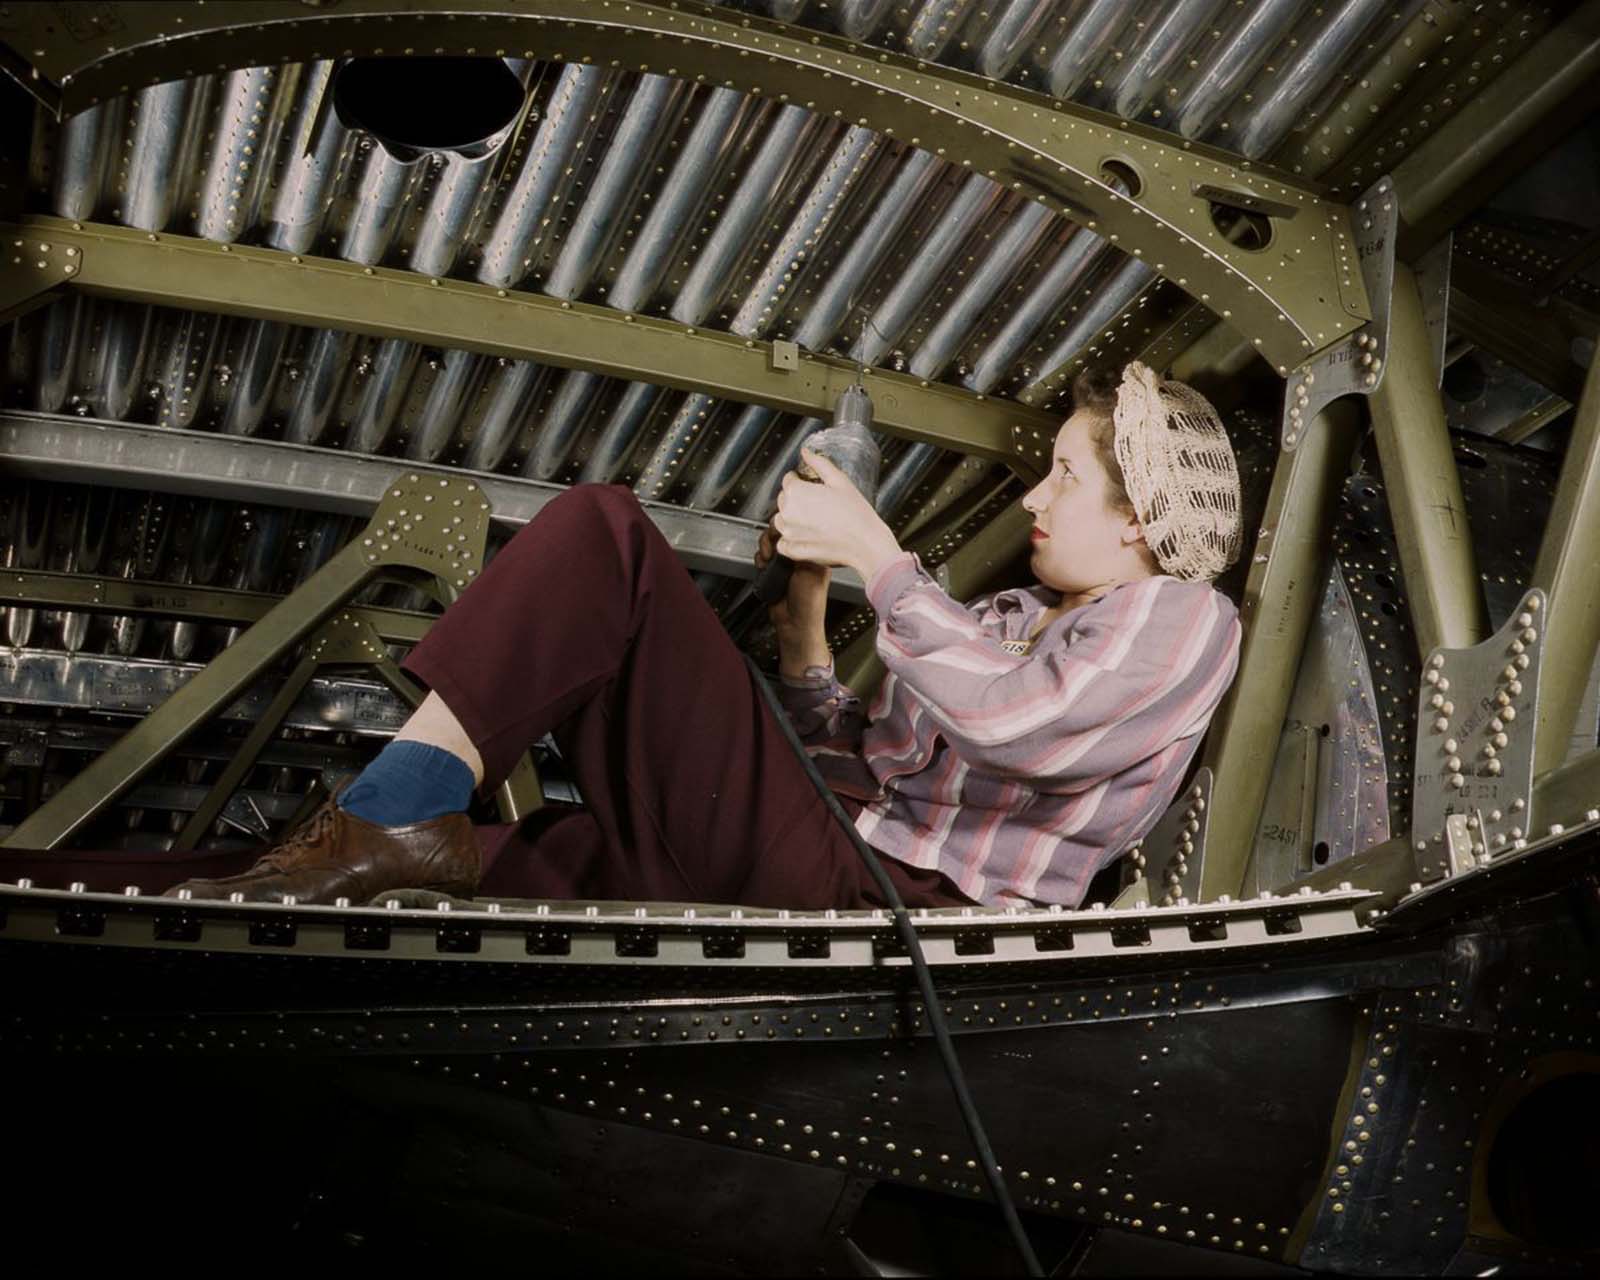 A Douglas Aircraft Company worker rivets an A-20 bomber at the plant in Long Beach, California, 1942.